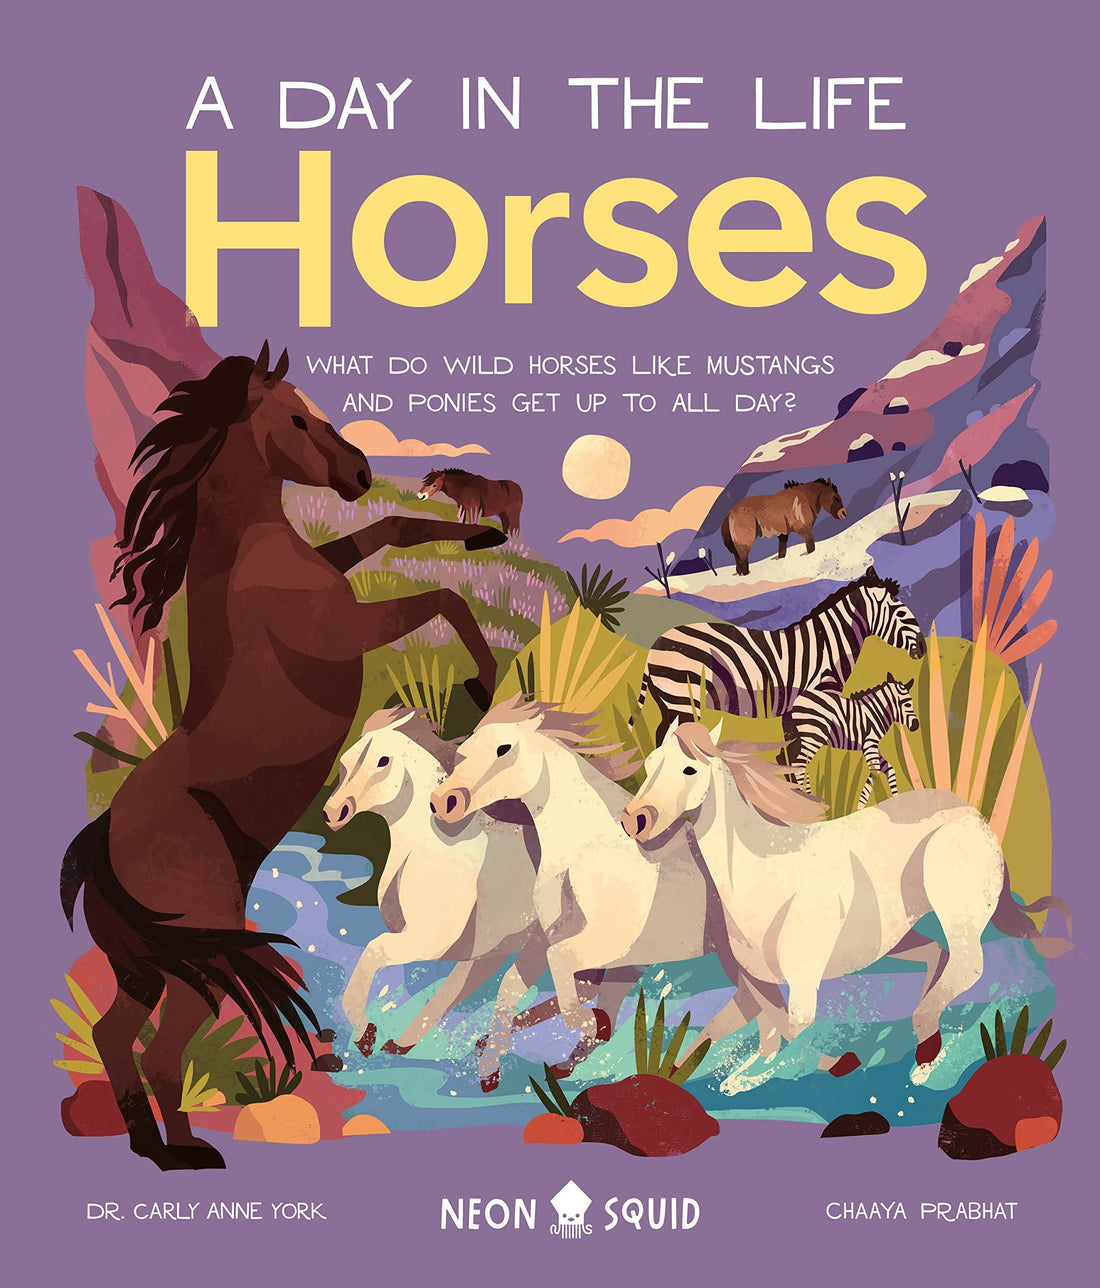 A Day in the Life: Horses - Parkette.